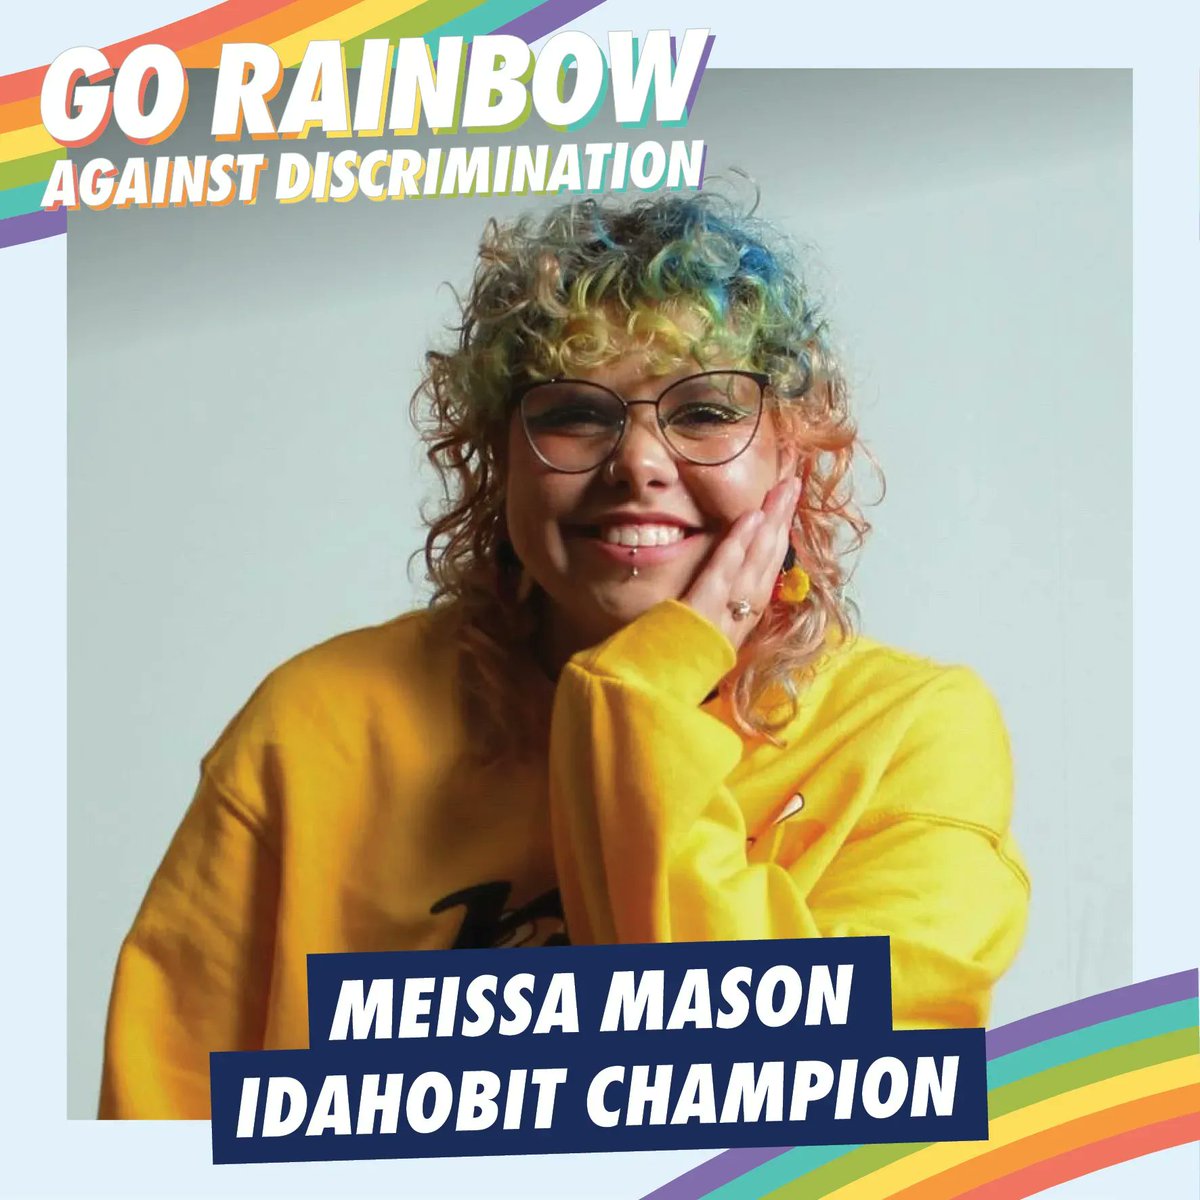 “It is so important to be an ally and uplift other intersections of the queer community different to your own.' – Meissa Mason. Read more: buff.ly/3pk92xh #idahobit2023